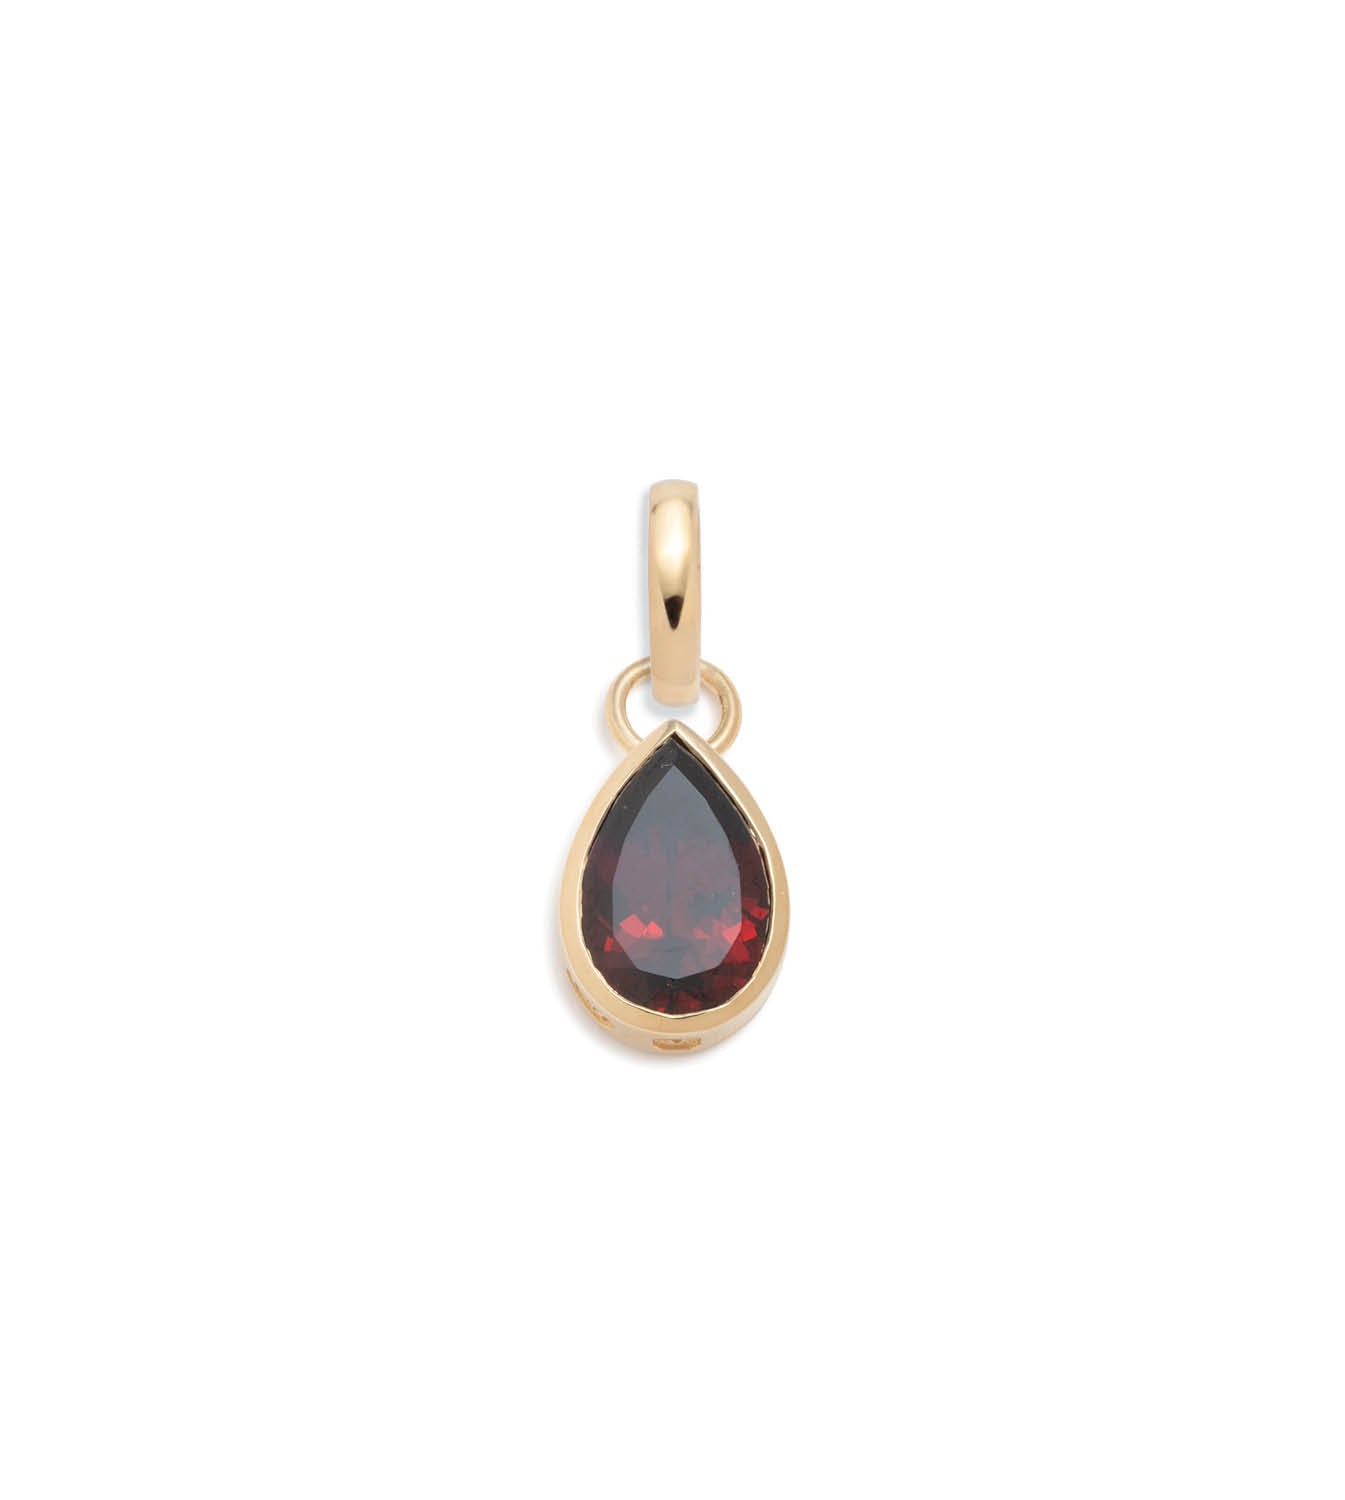 Forever & Always a Pair - Love : 4.7ct Garnet Pear Pendant with Oval Pushgate